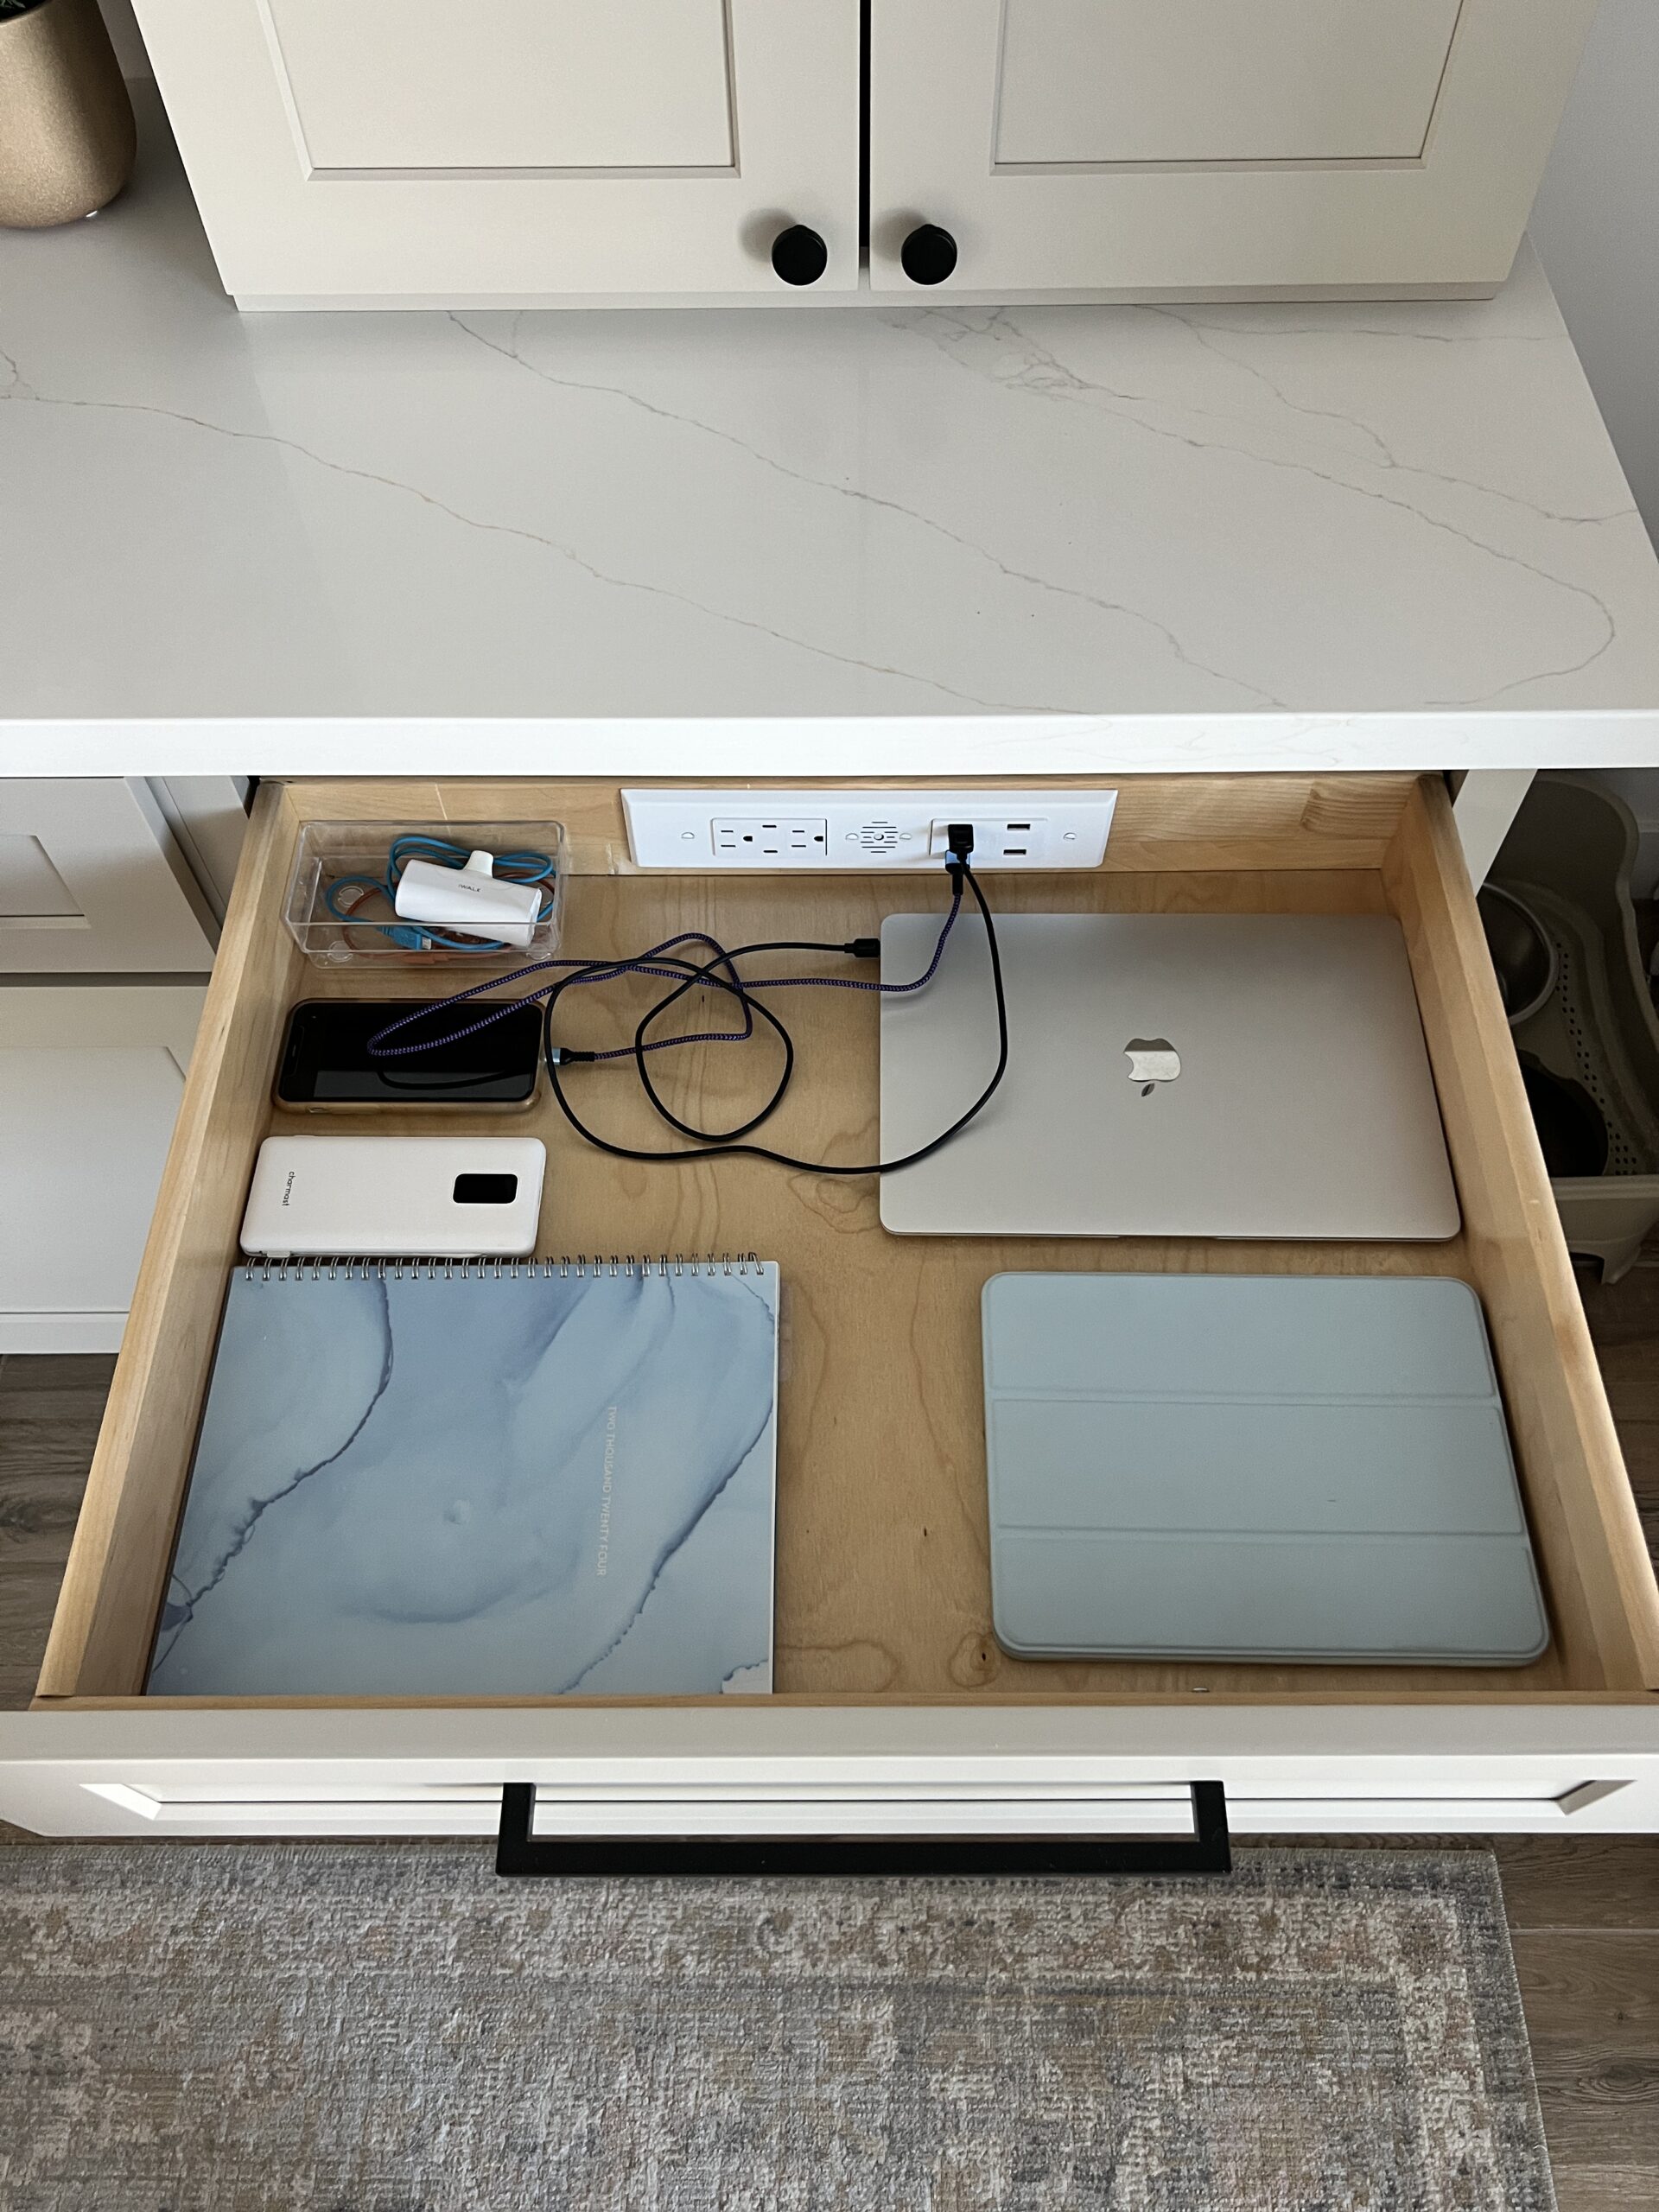 Organized charging drawer with Docking Drawer outlet